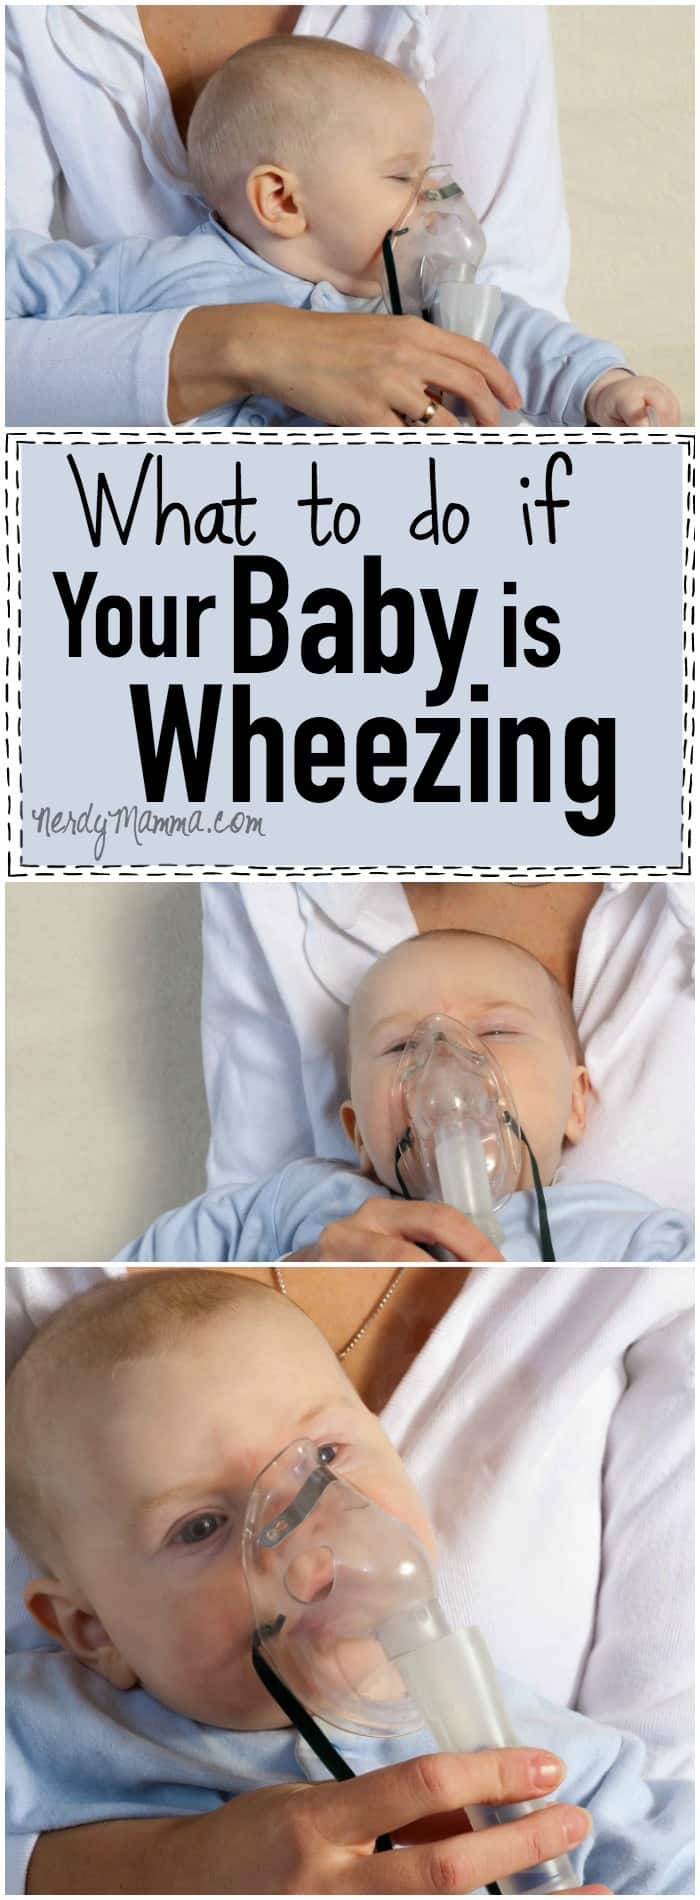 I need to keep these thoughts on What to do if your baby wheezes! Totally pinning this!